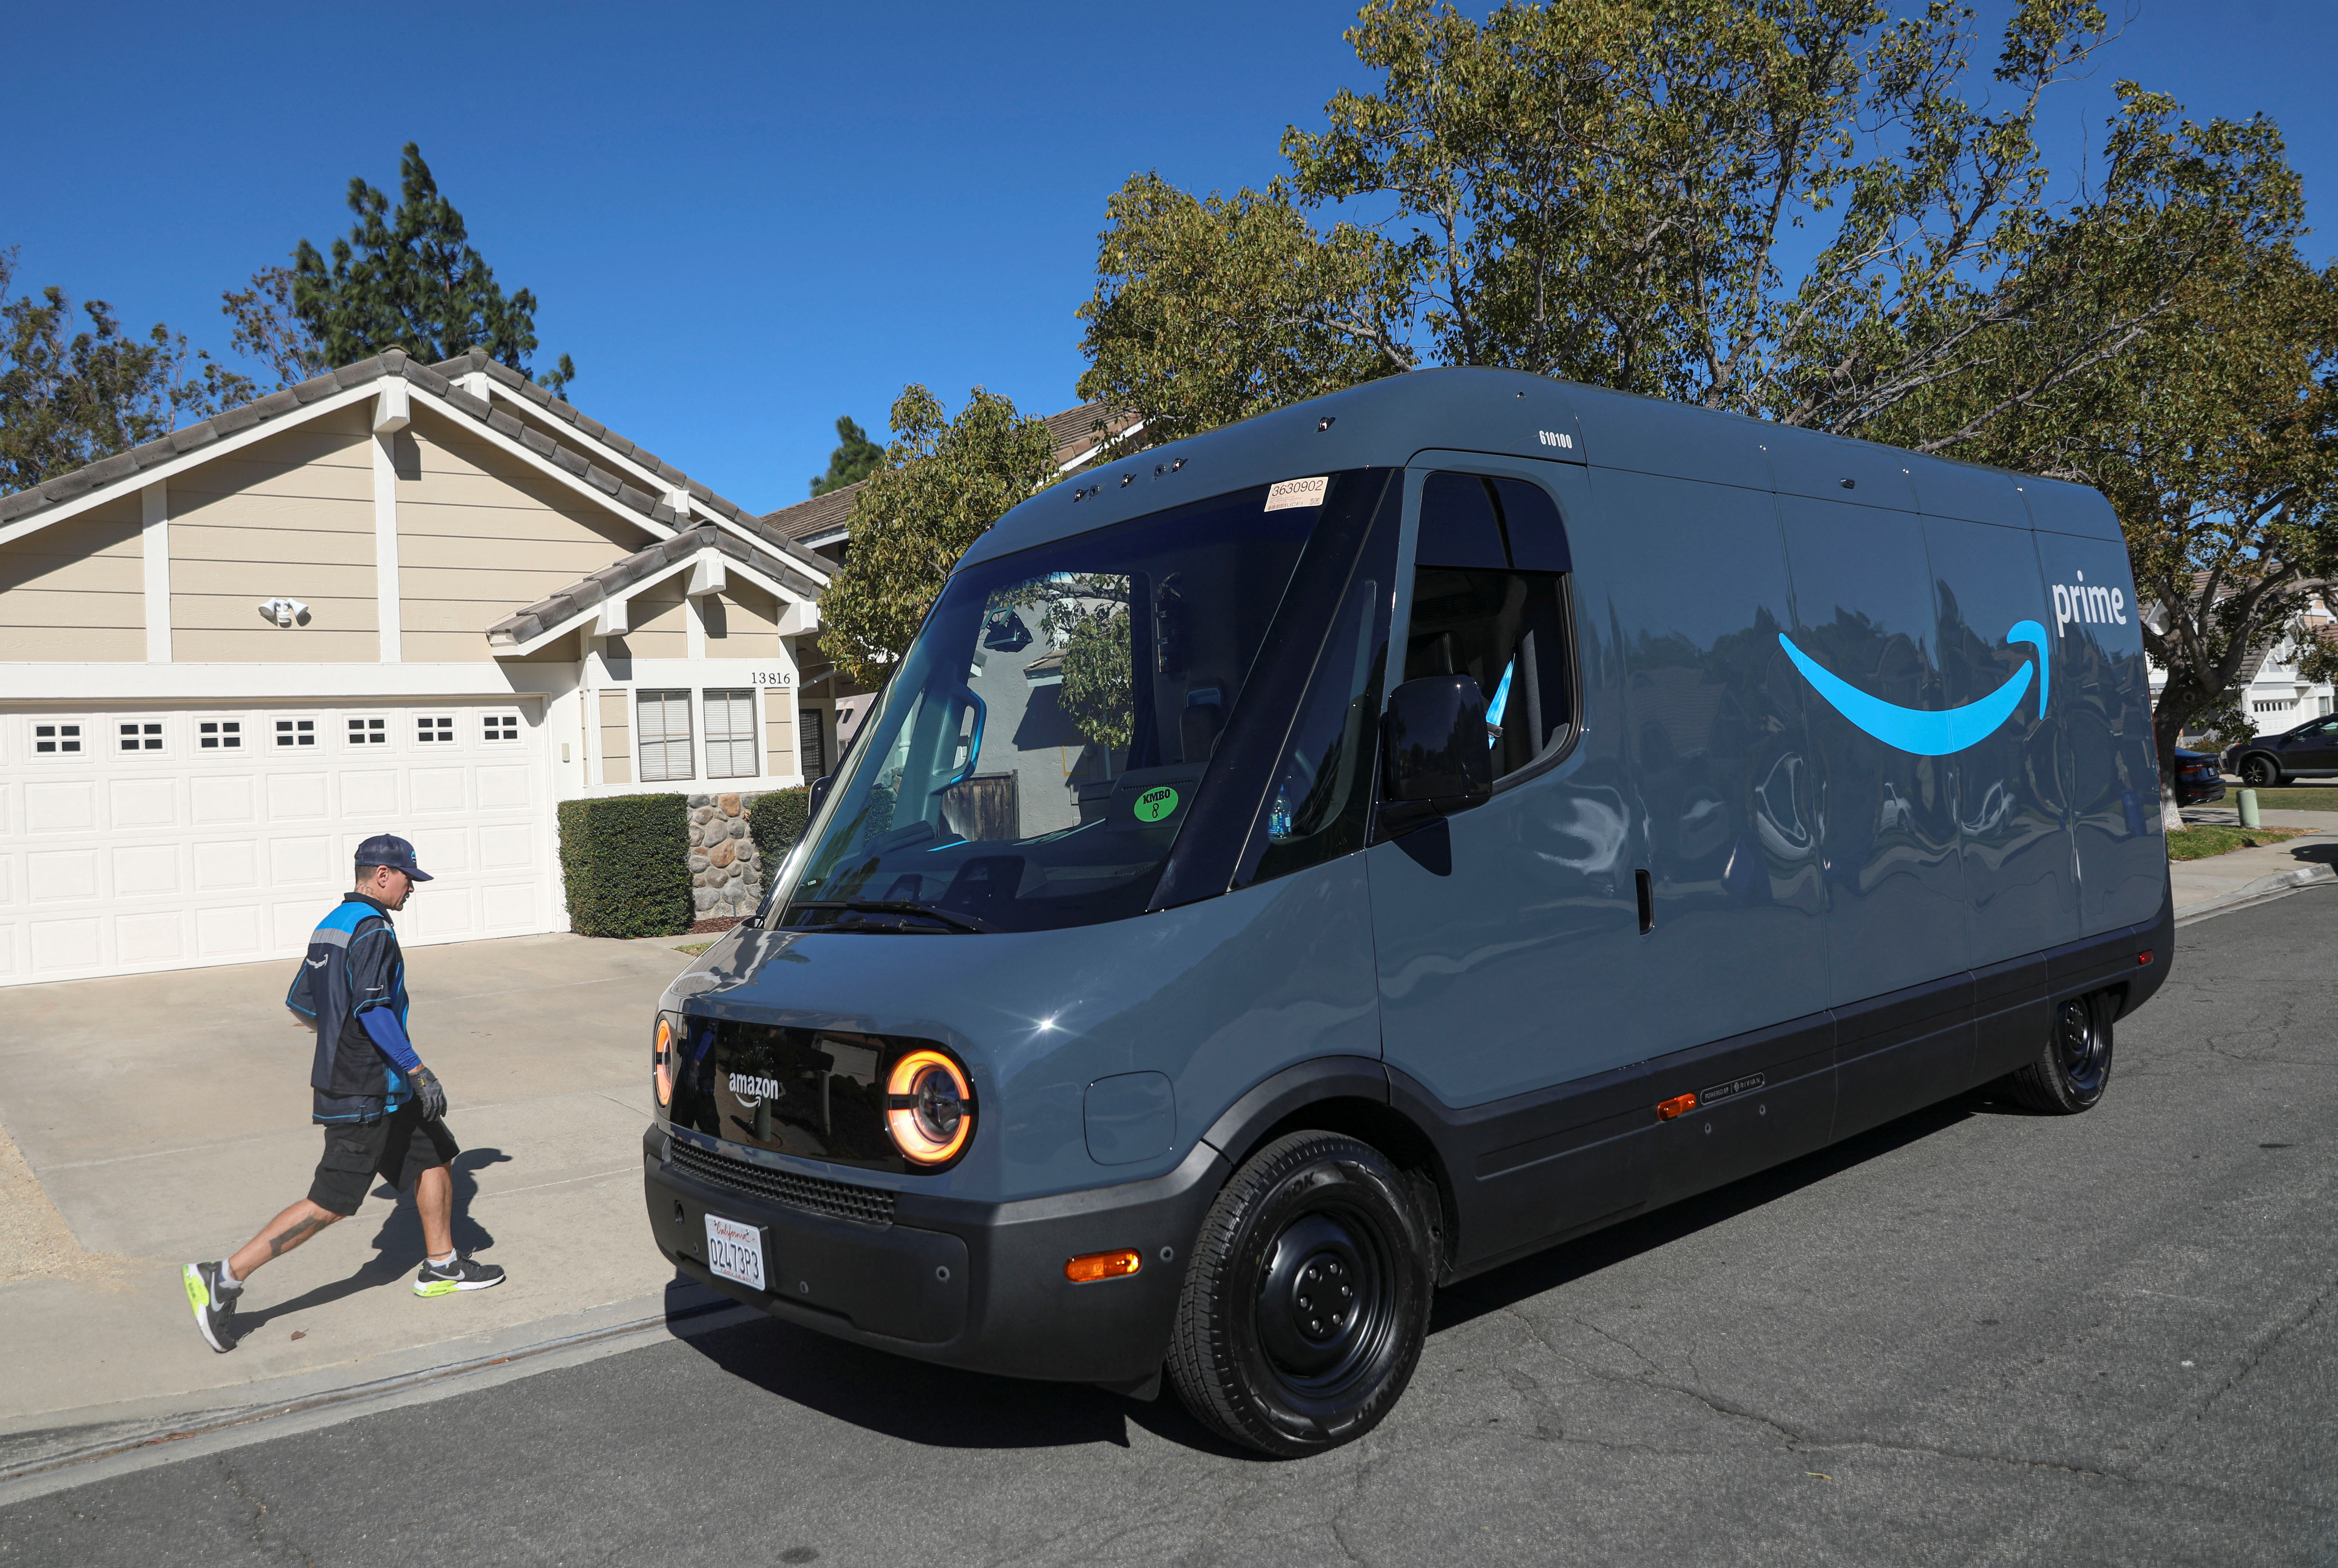 A delivery driver on his rounds in an Amazon Rivian Electric truck in Poway, California, U.S.